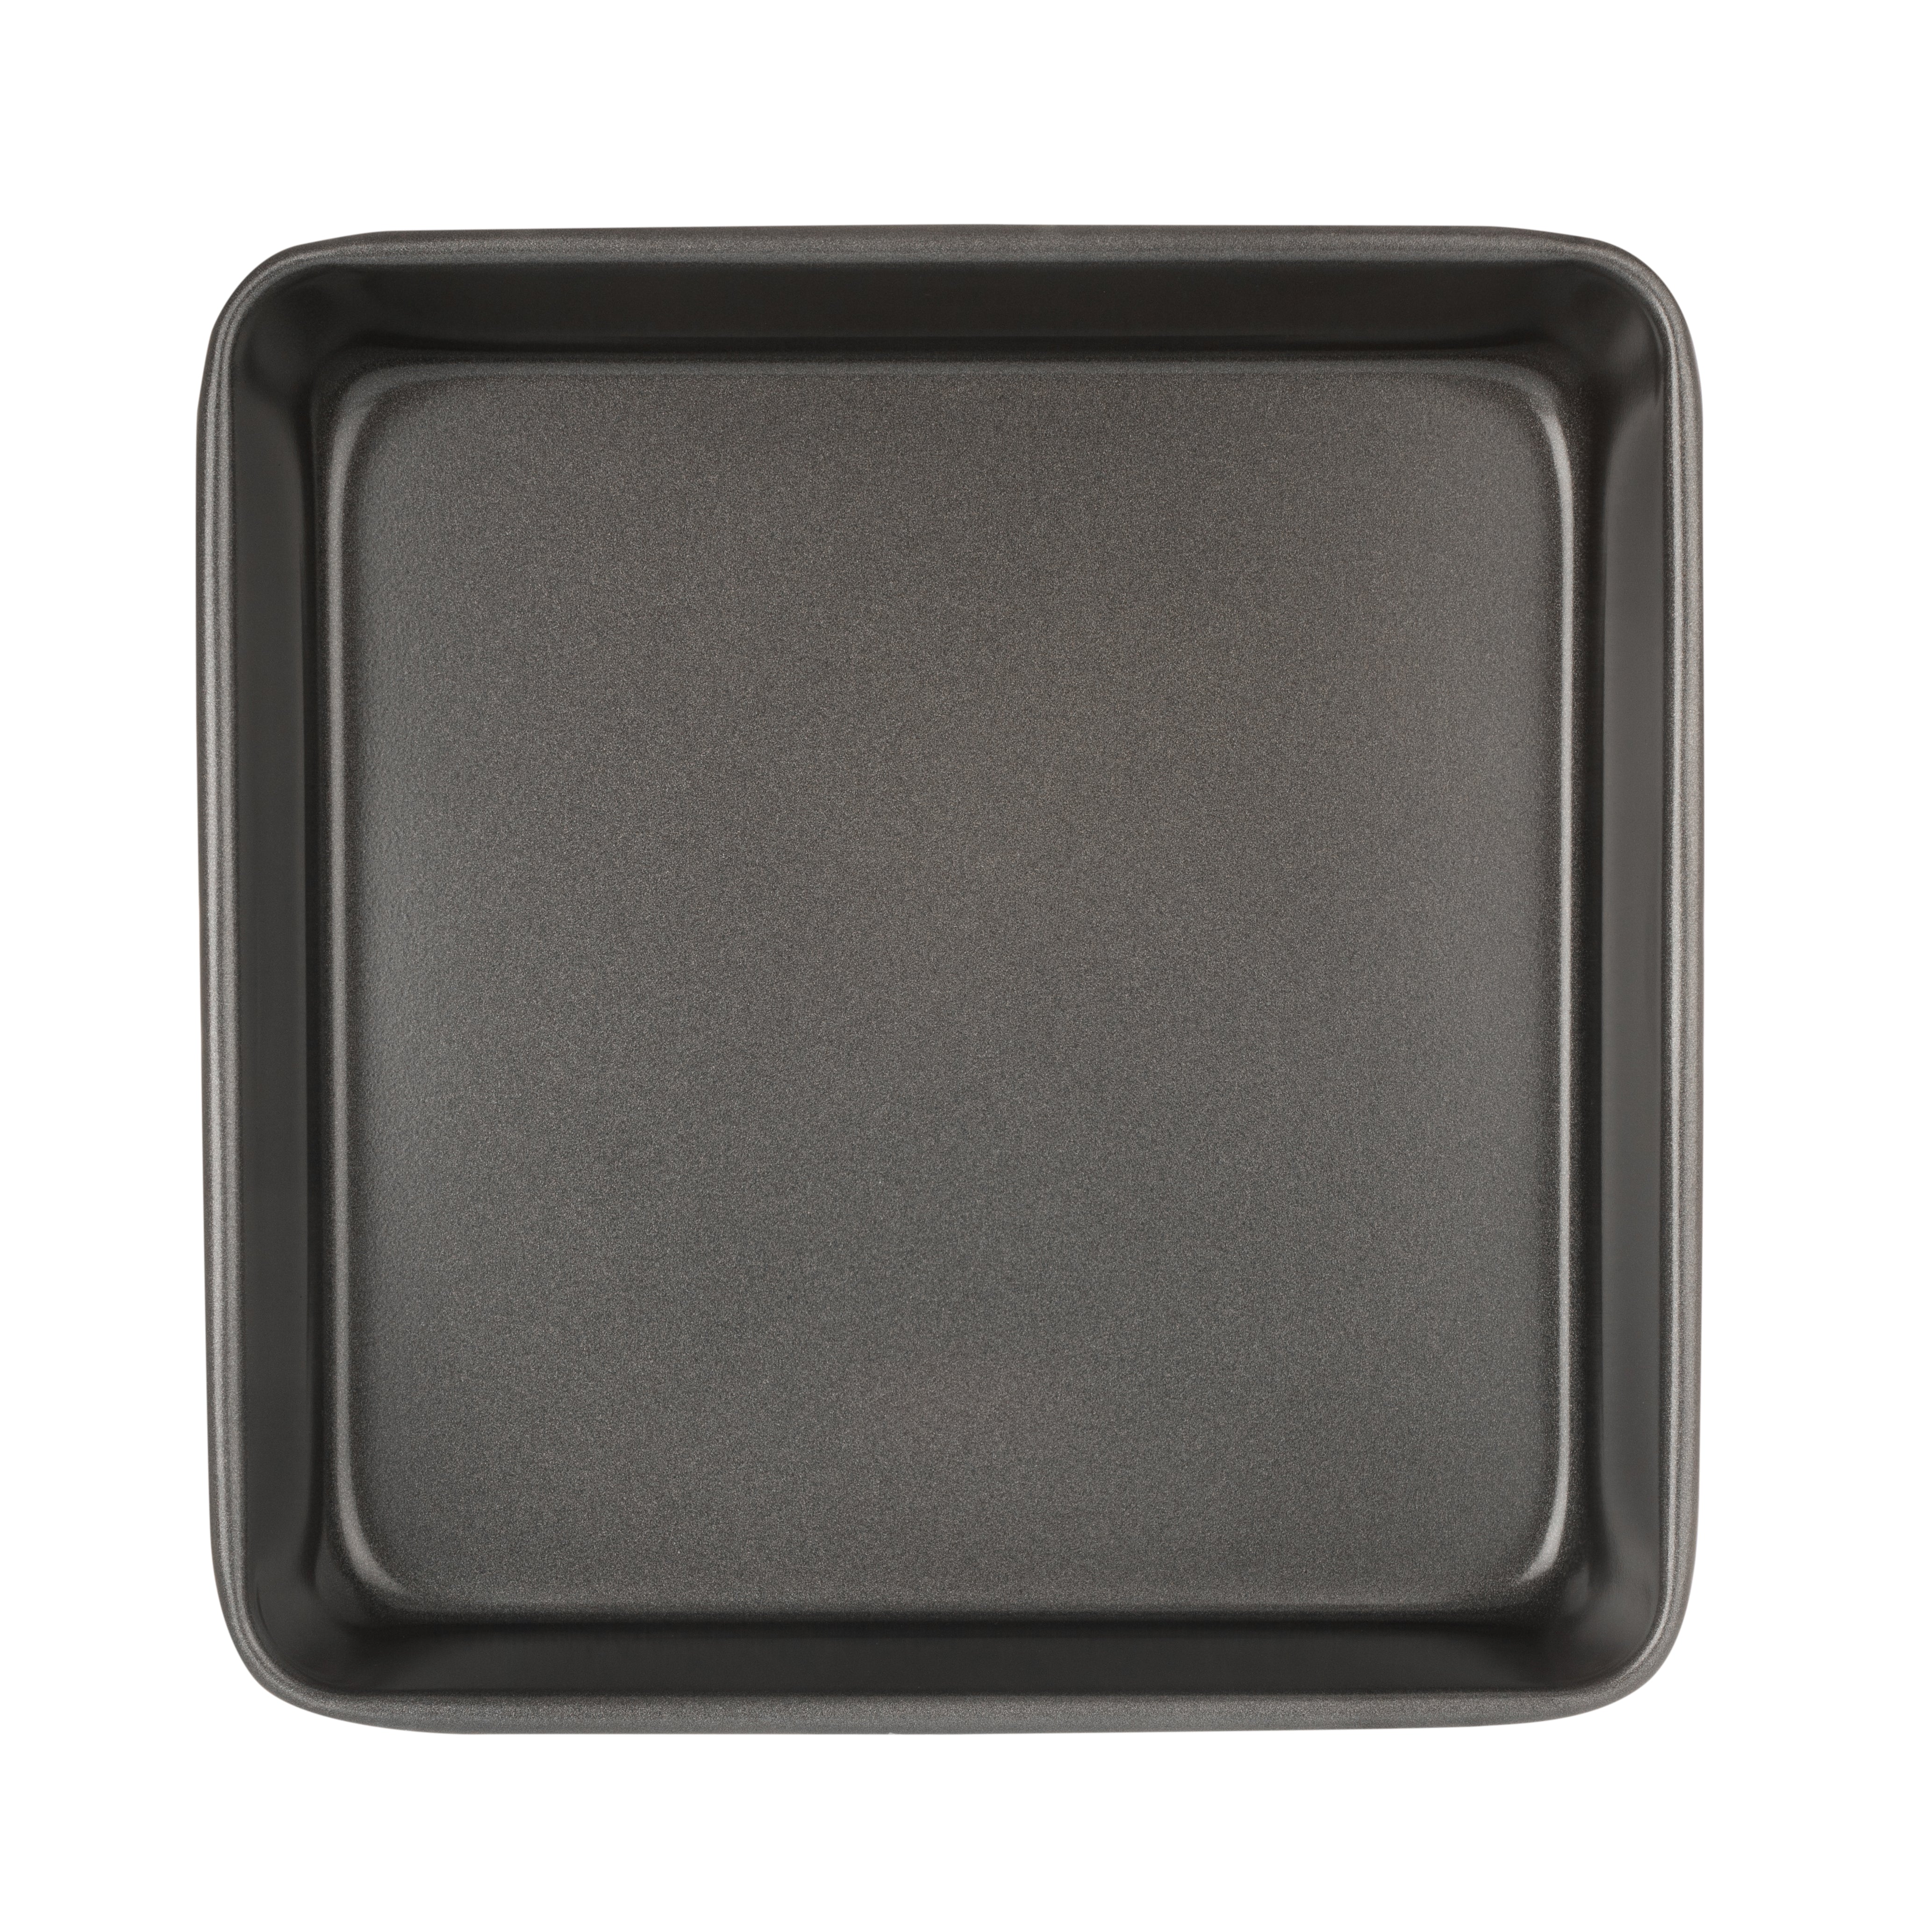 Luxe Kitchen Professional Quality Square Cake Baking Pan 23cm x 5cm (9") - The Cooks Cupboard Ltd